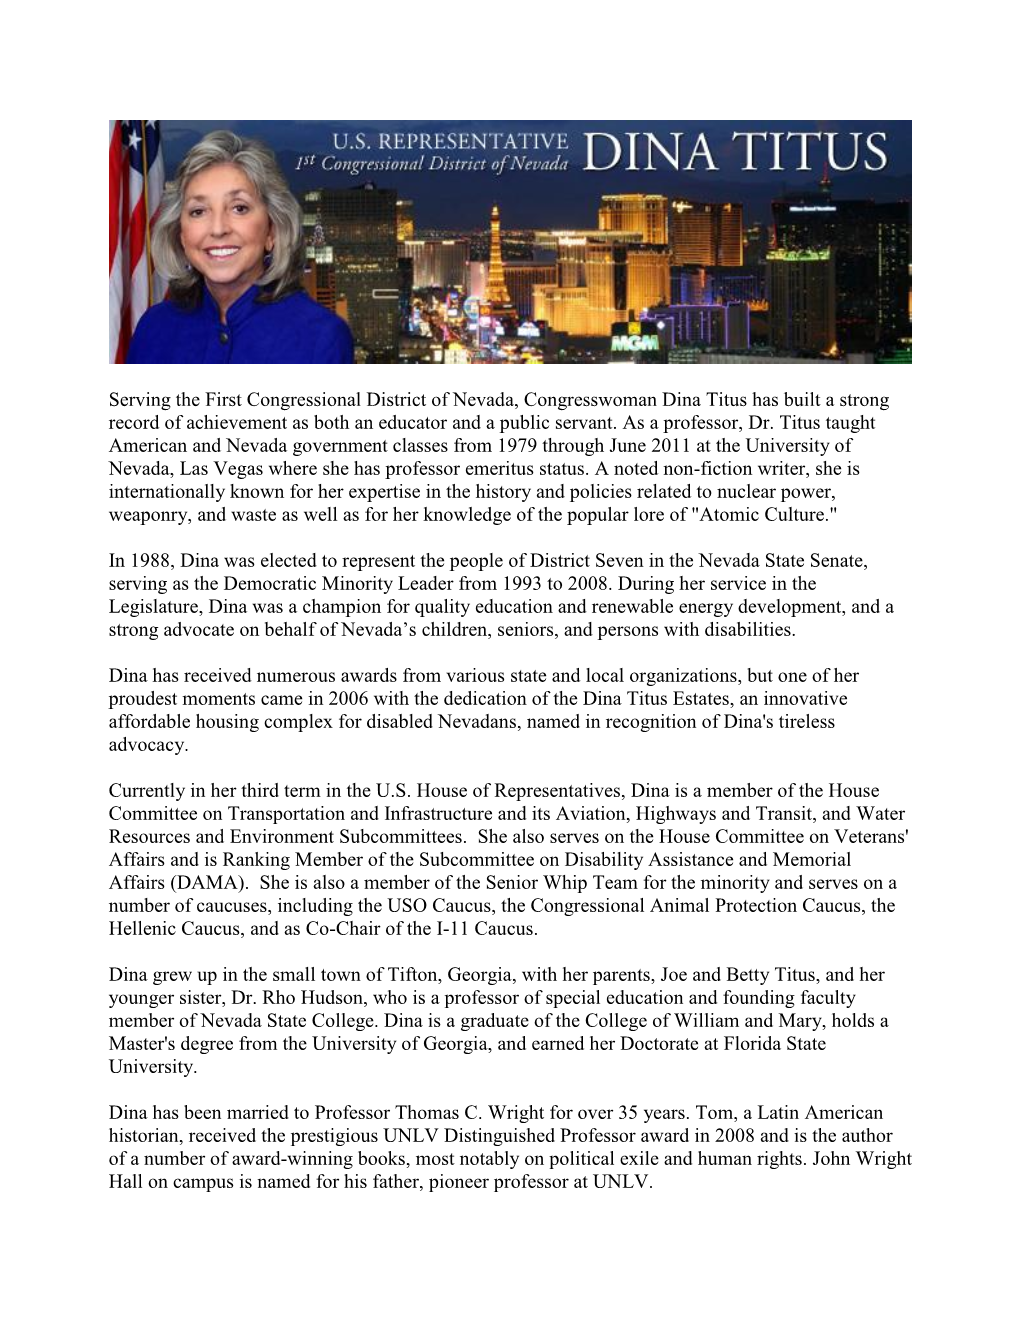 Serving the First Congressional District of Nevada, Congresswoman Dina Titus Has Built a Strong Record of Achievement As Both an Educator and a Public Servant